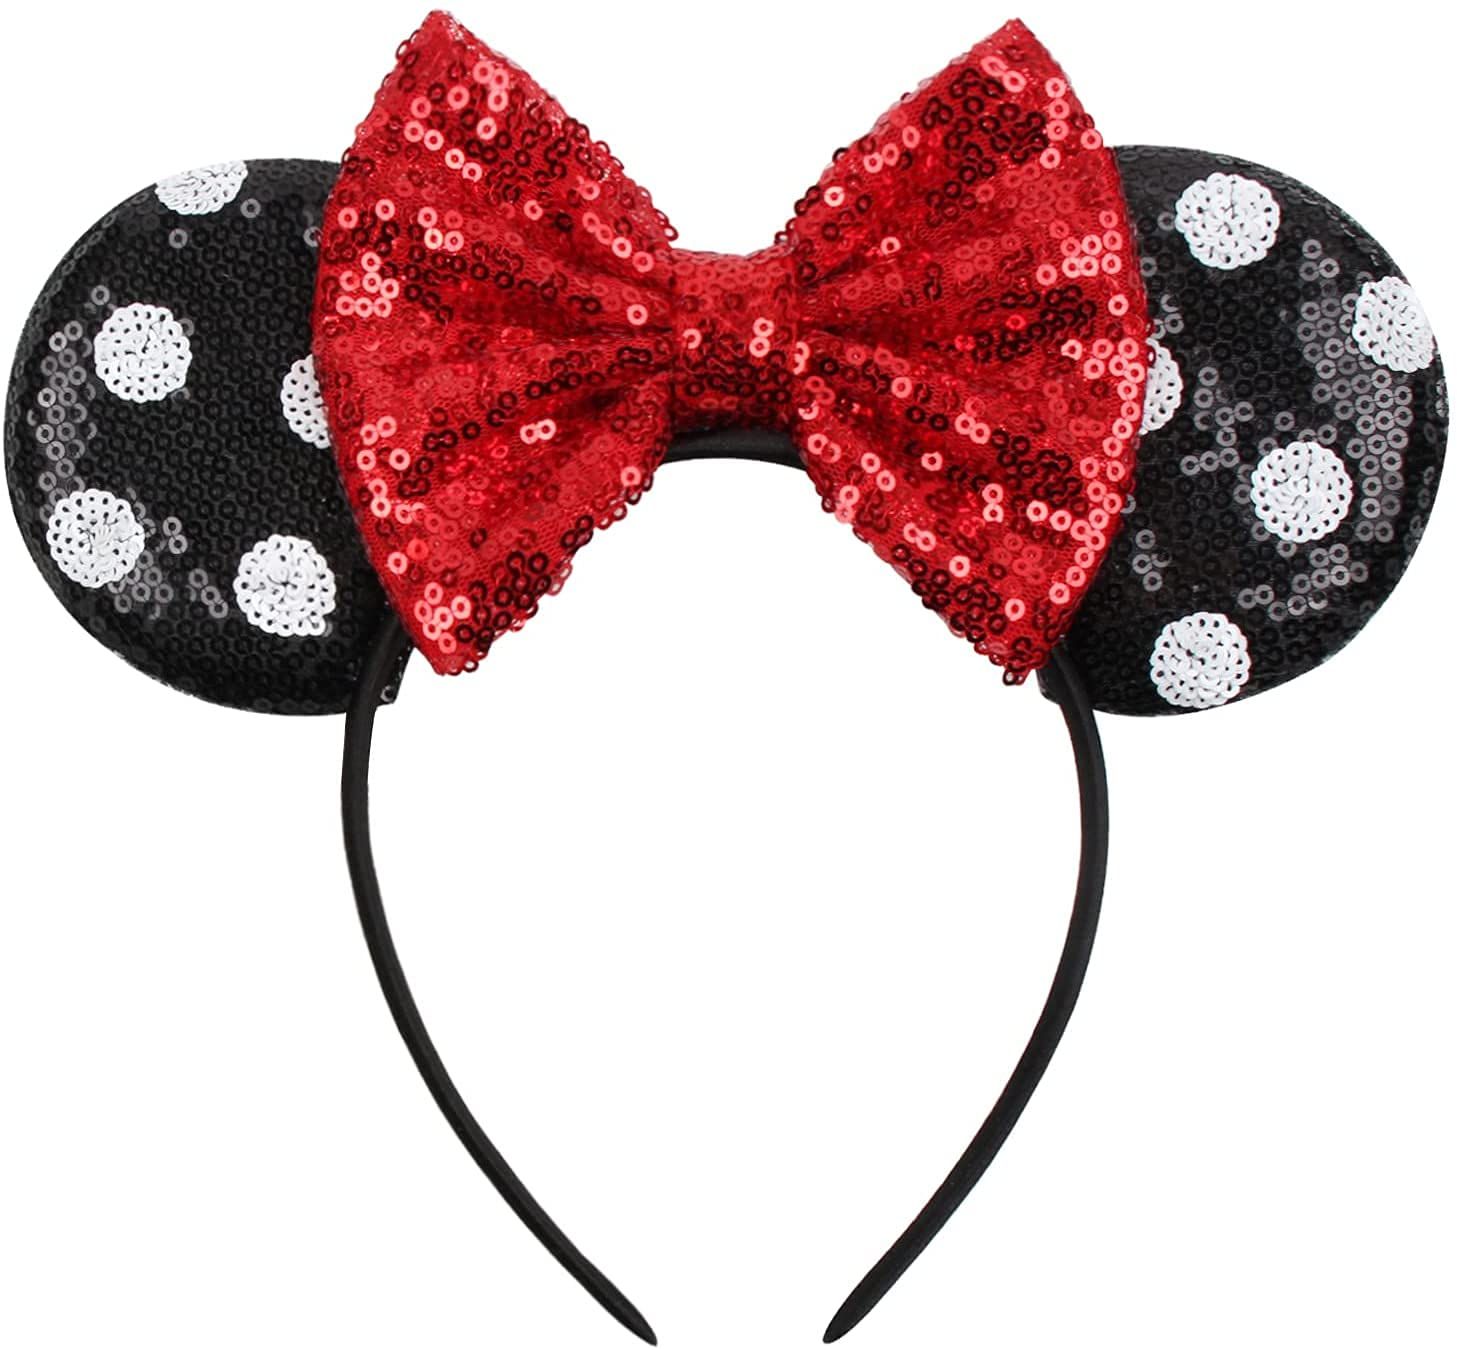 Mouse Ears Headbands with Bow and Sequins,Party Cosplay Costume for Girls or Women Black Dot | Amazon (US)